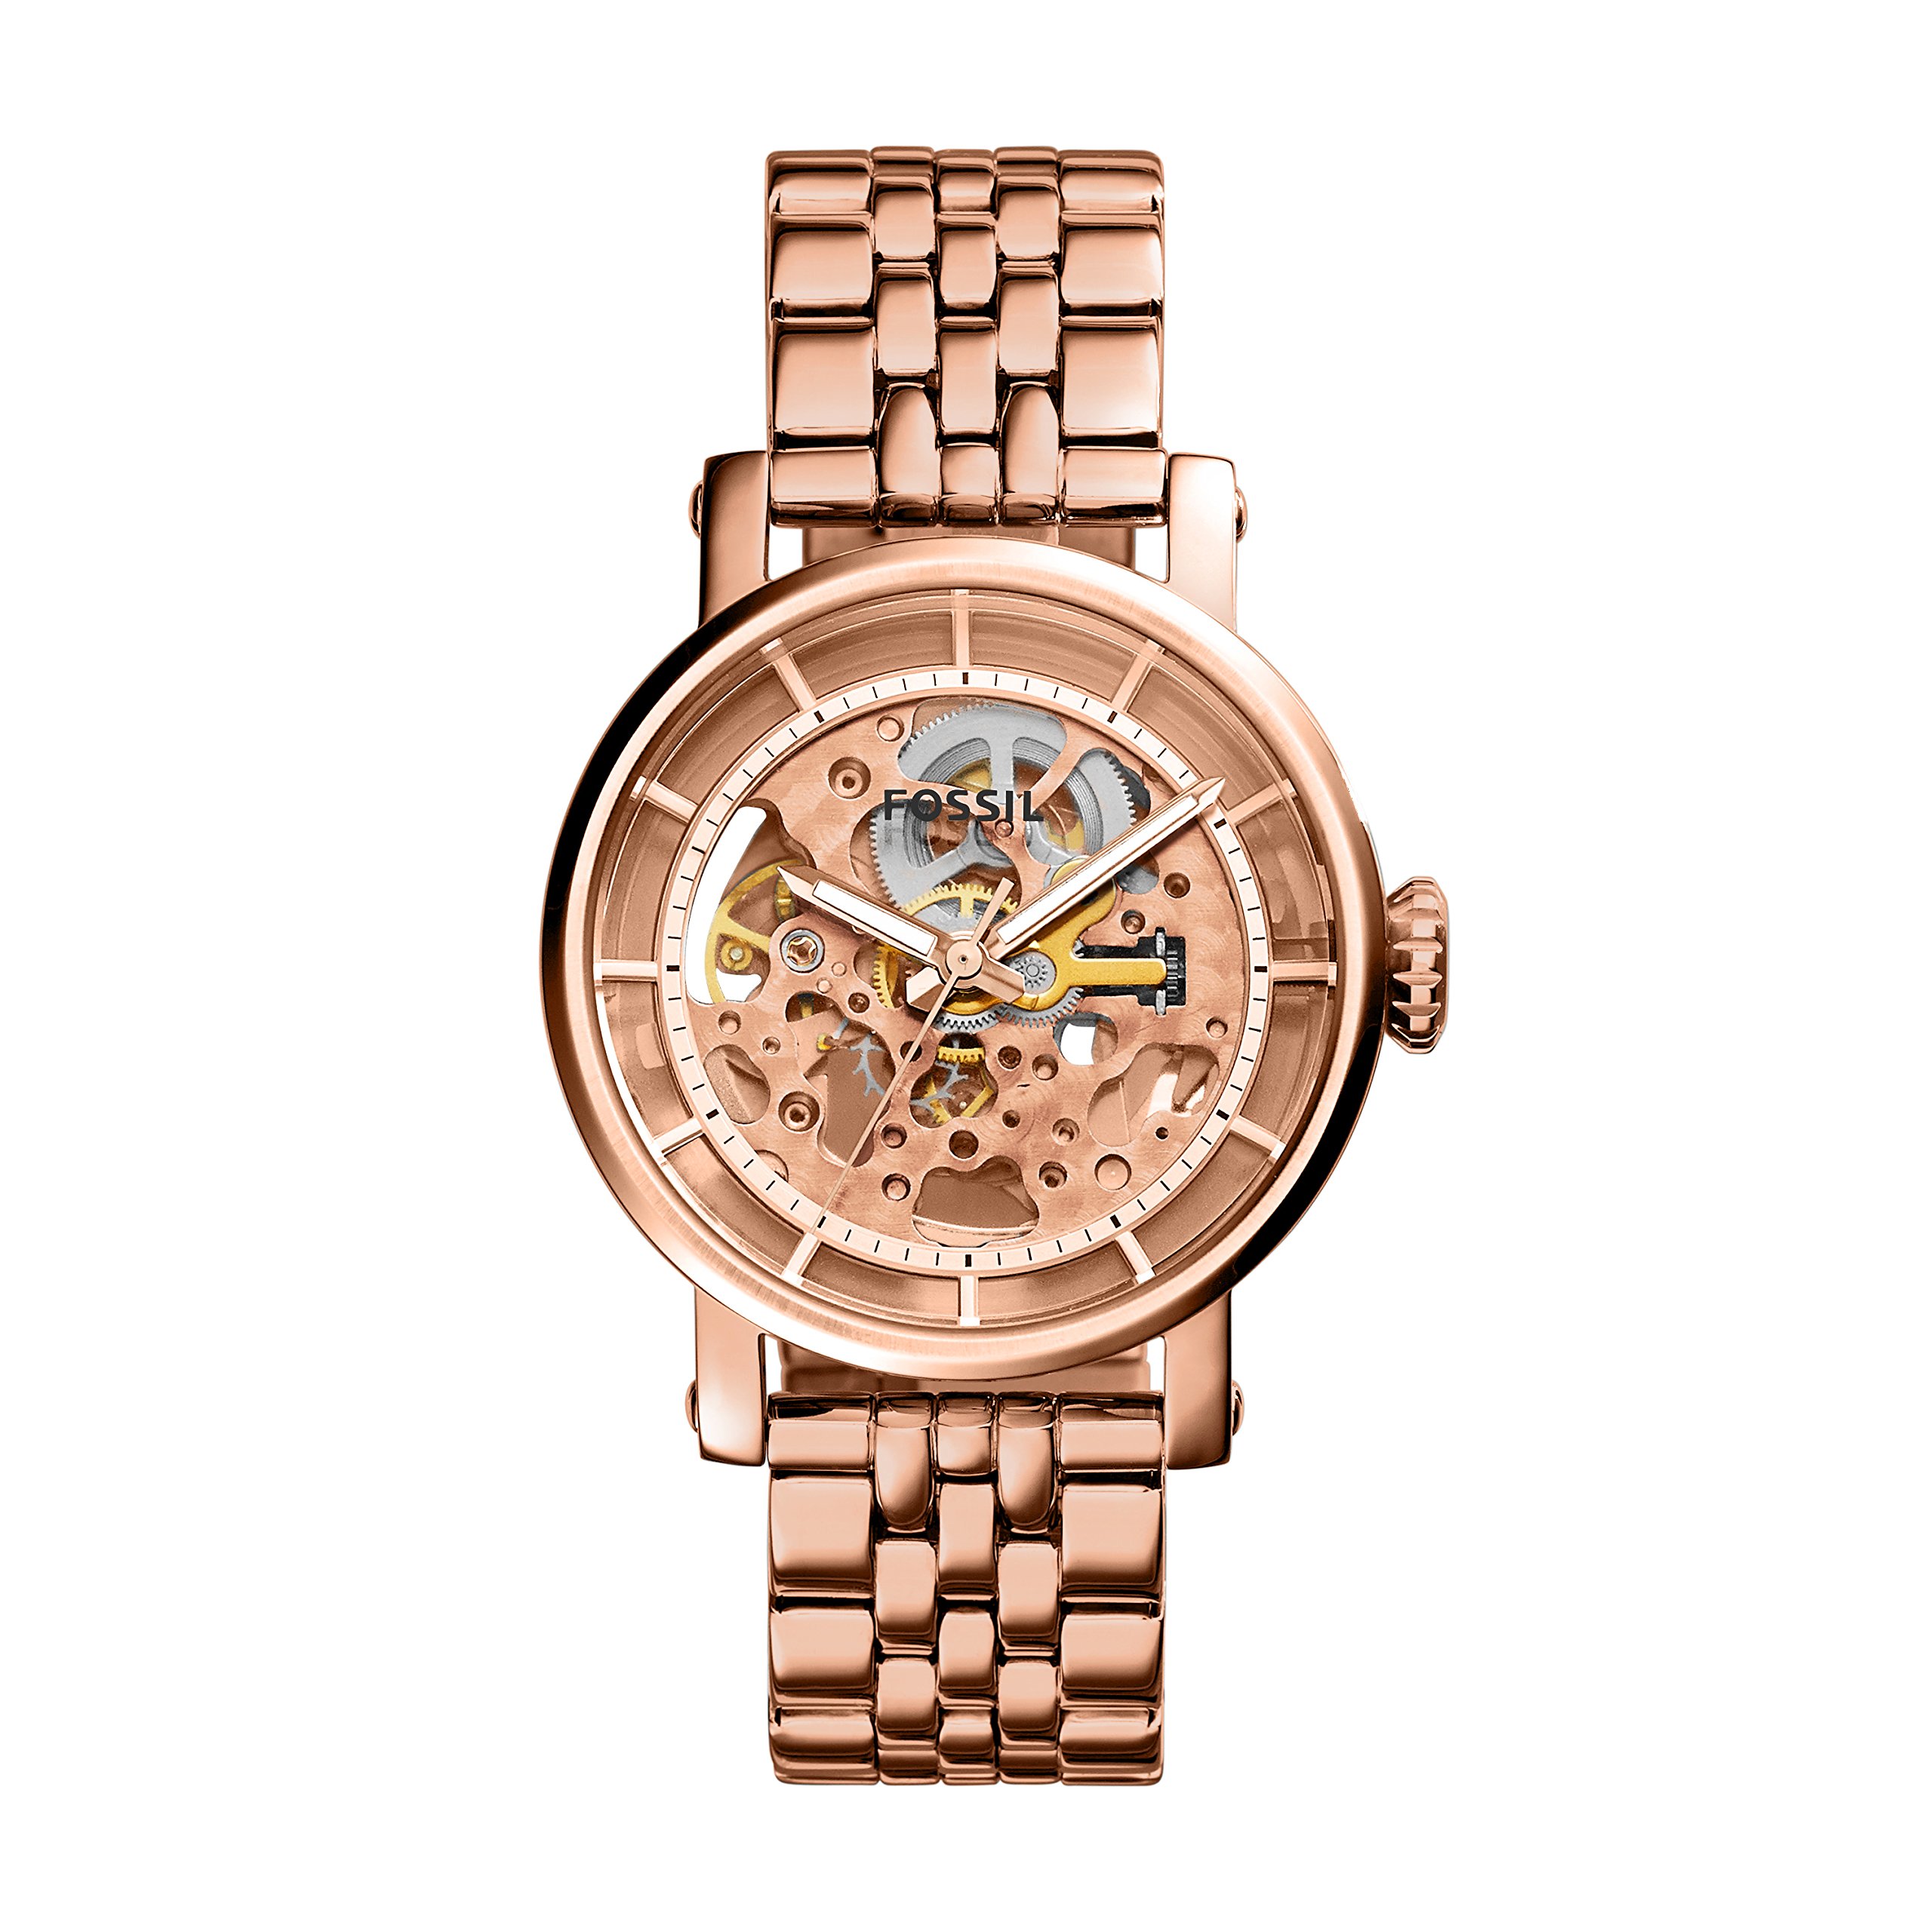 Fossil Women's ME3065 Original Boyfriend Automatic Rose Tone Stainless Steel Watch with Link Bracelet